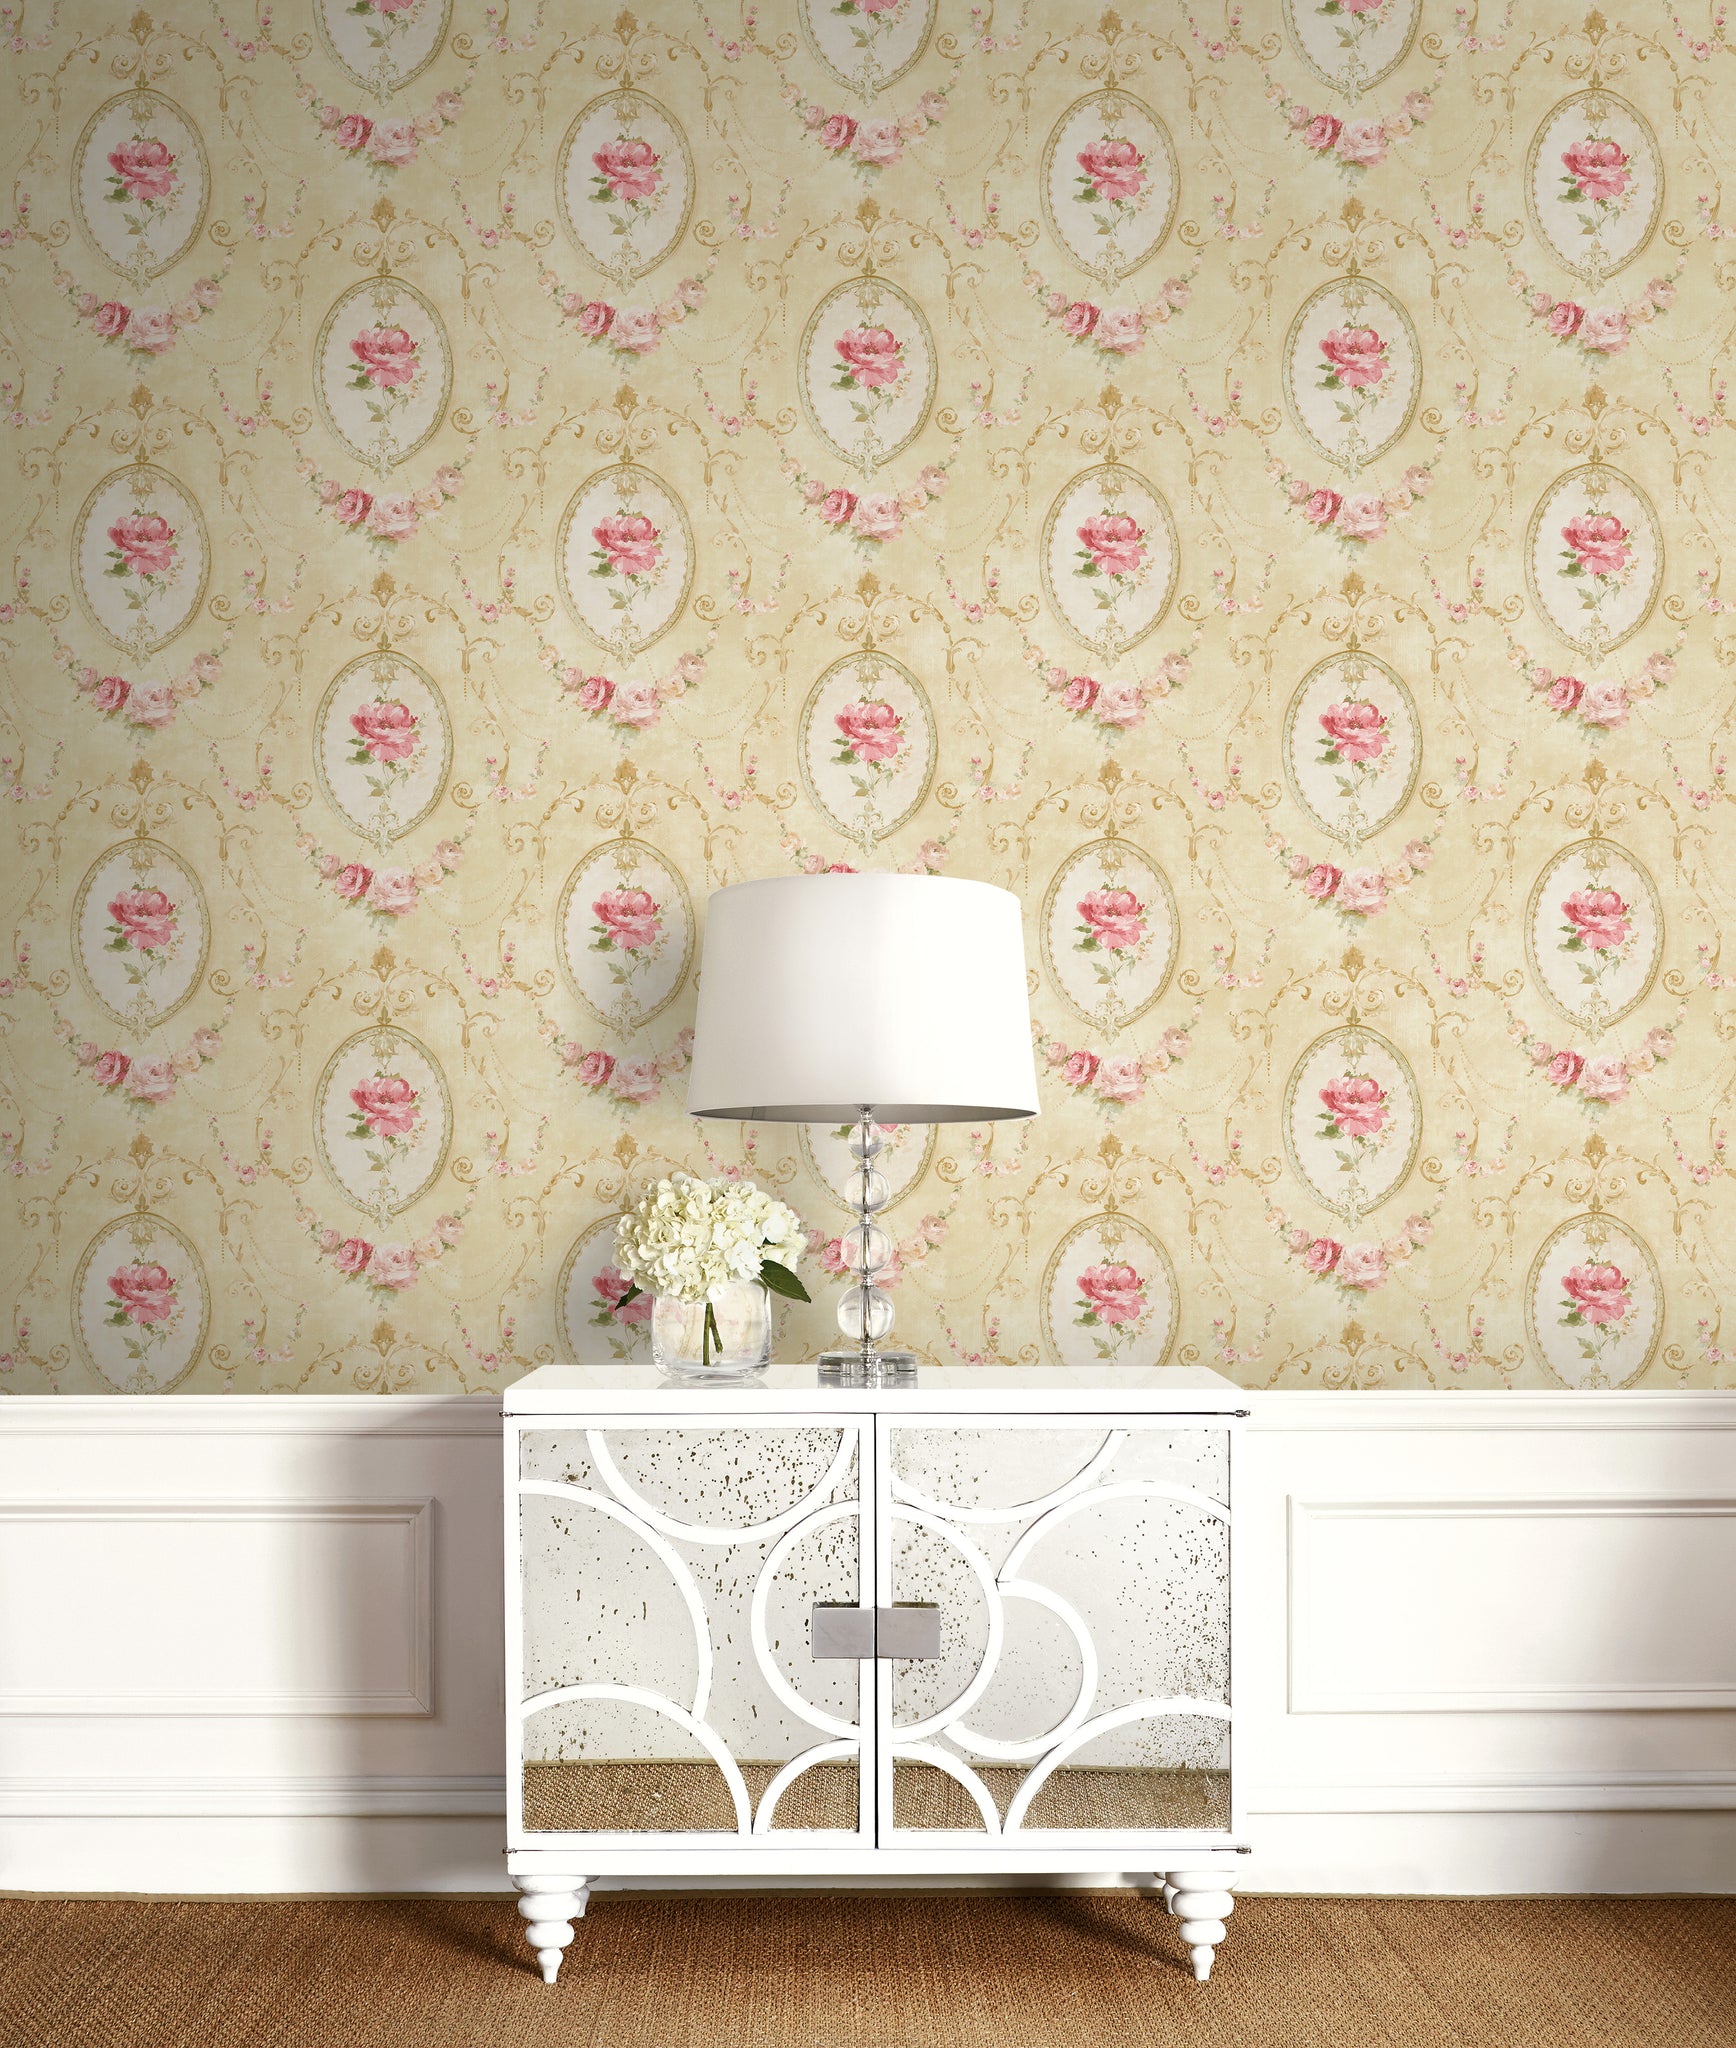 Casa Mia RM50805 Classical Floral Bouquet Soft Yellow and Pink Wallpaper